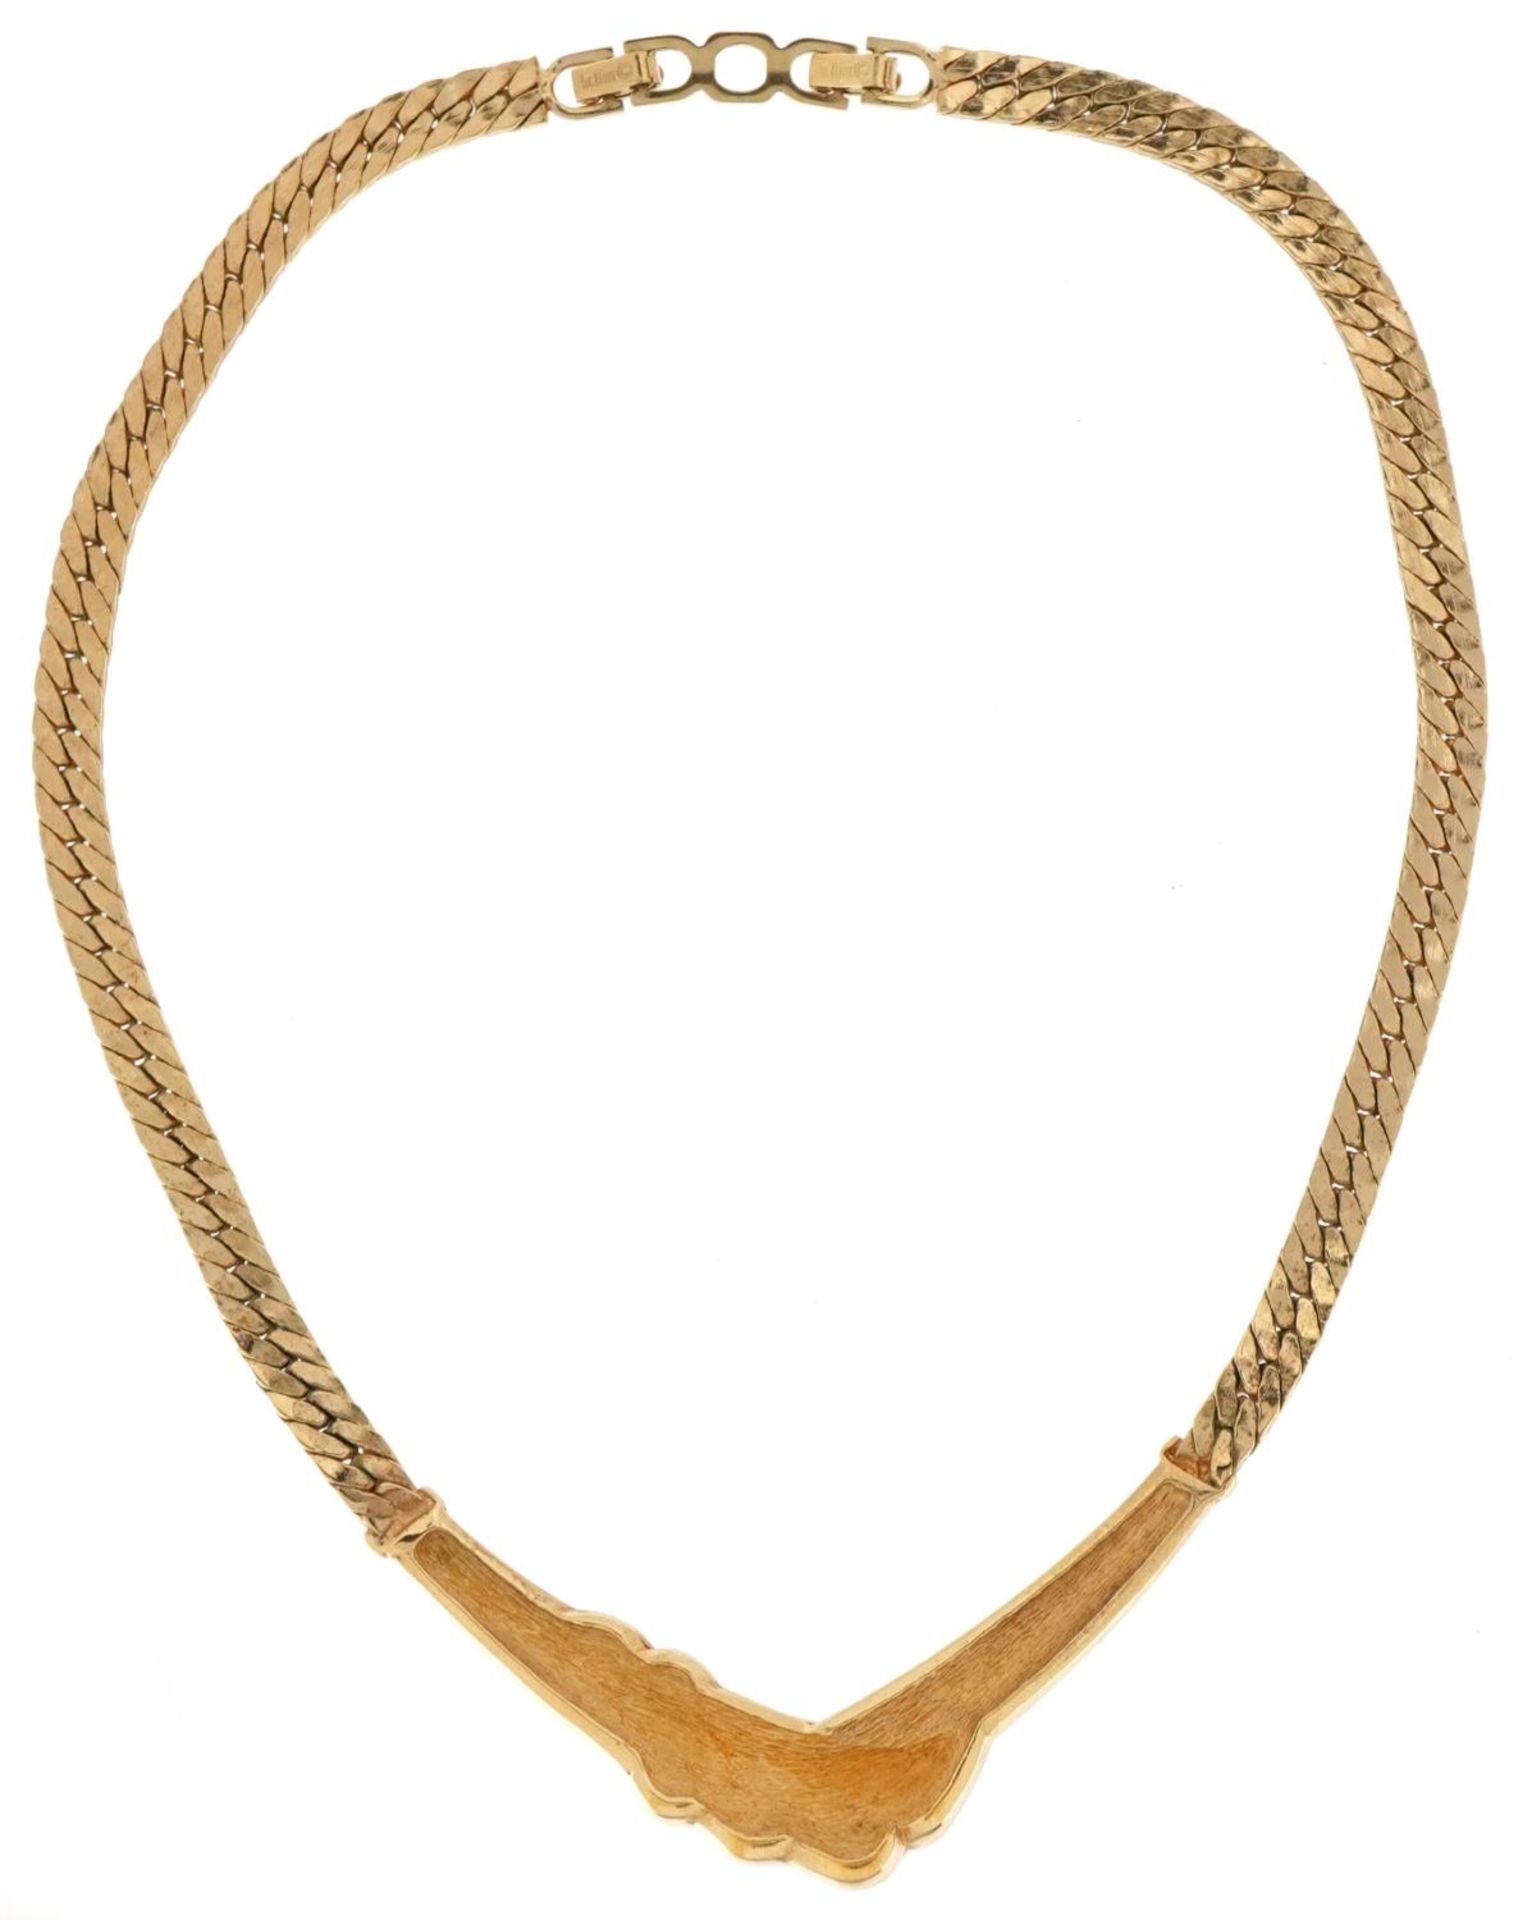 Christian Dior, vintage gold plated black enamel and clear stone necklace, 40cm in length, 43.5g - Bild 3 aus 4